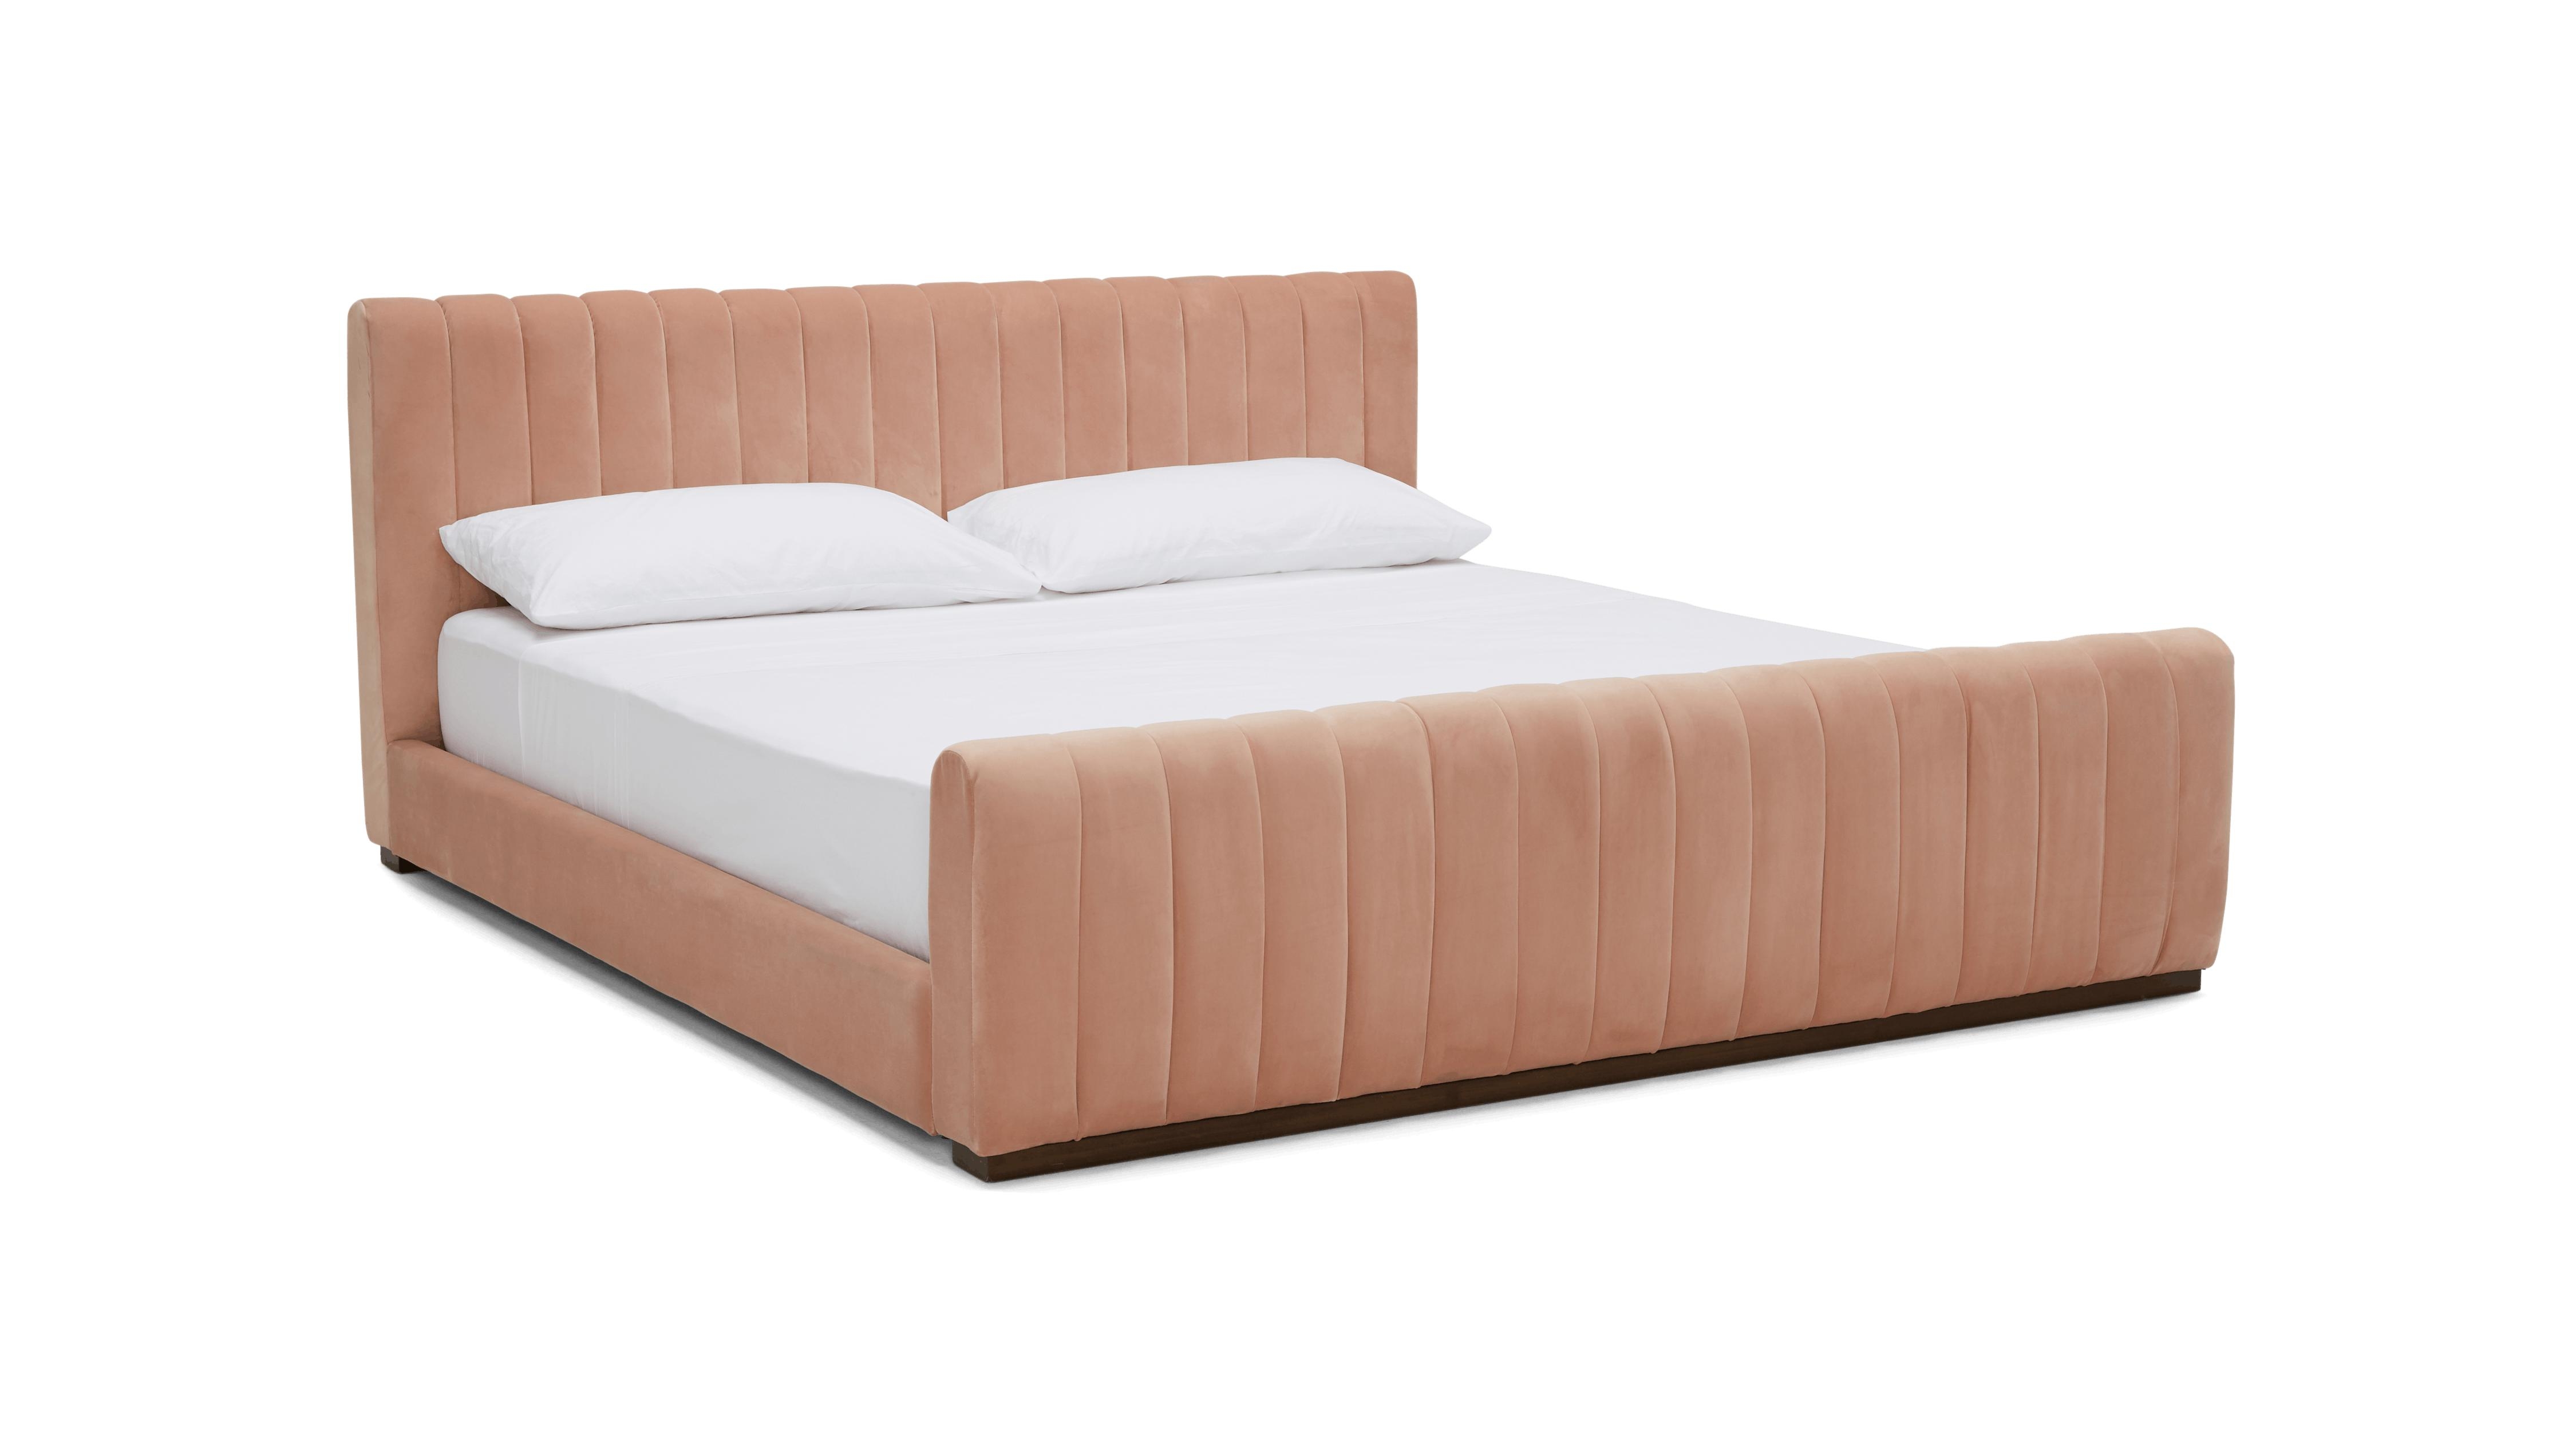 Pink Camille Mid Century Modern Bed - Royale Blush - Mocha - Cal King - Image 1